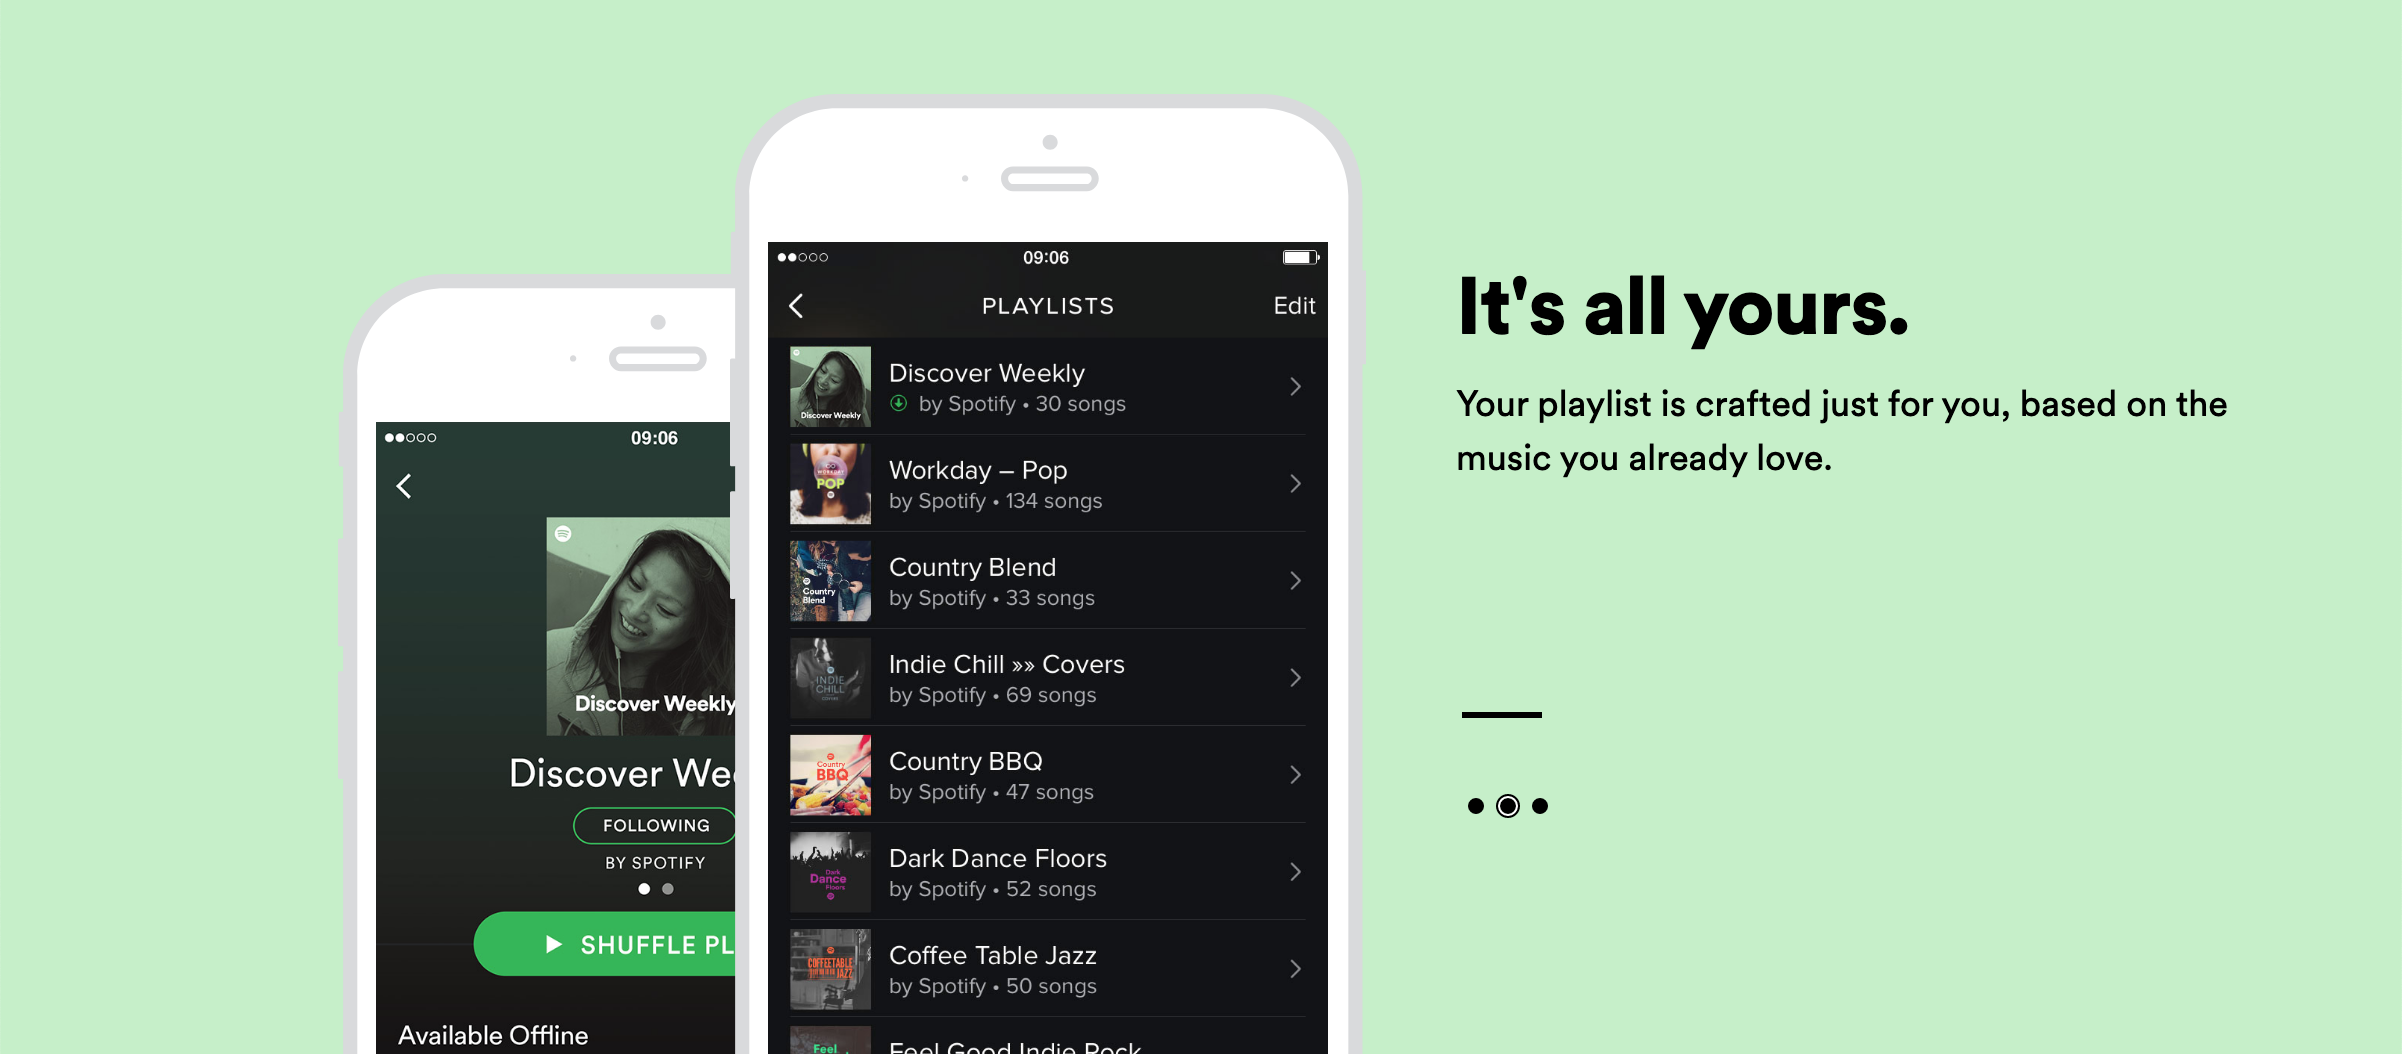 Spotify’s newly granted patent could allow the company to monitor your speech to improve its music recommendations